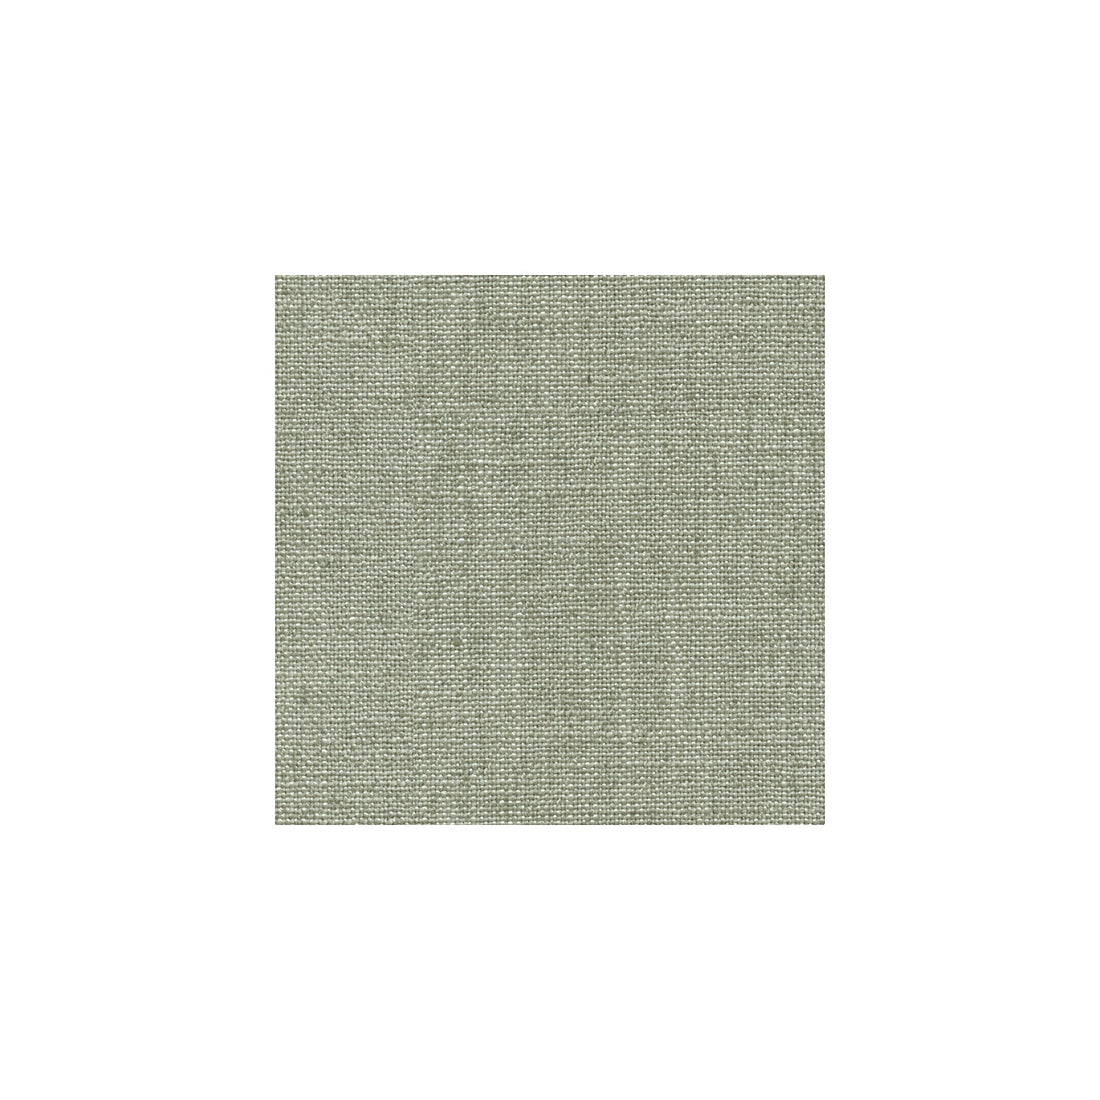 Denman fabric in sterling color - pattern 33008.11.0 - by Kravet Basics in the Sarah Richardson Affinity collection